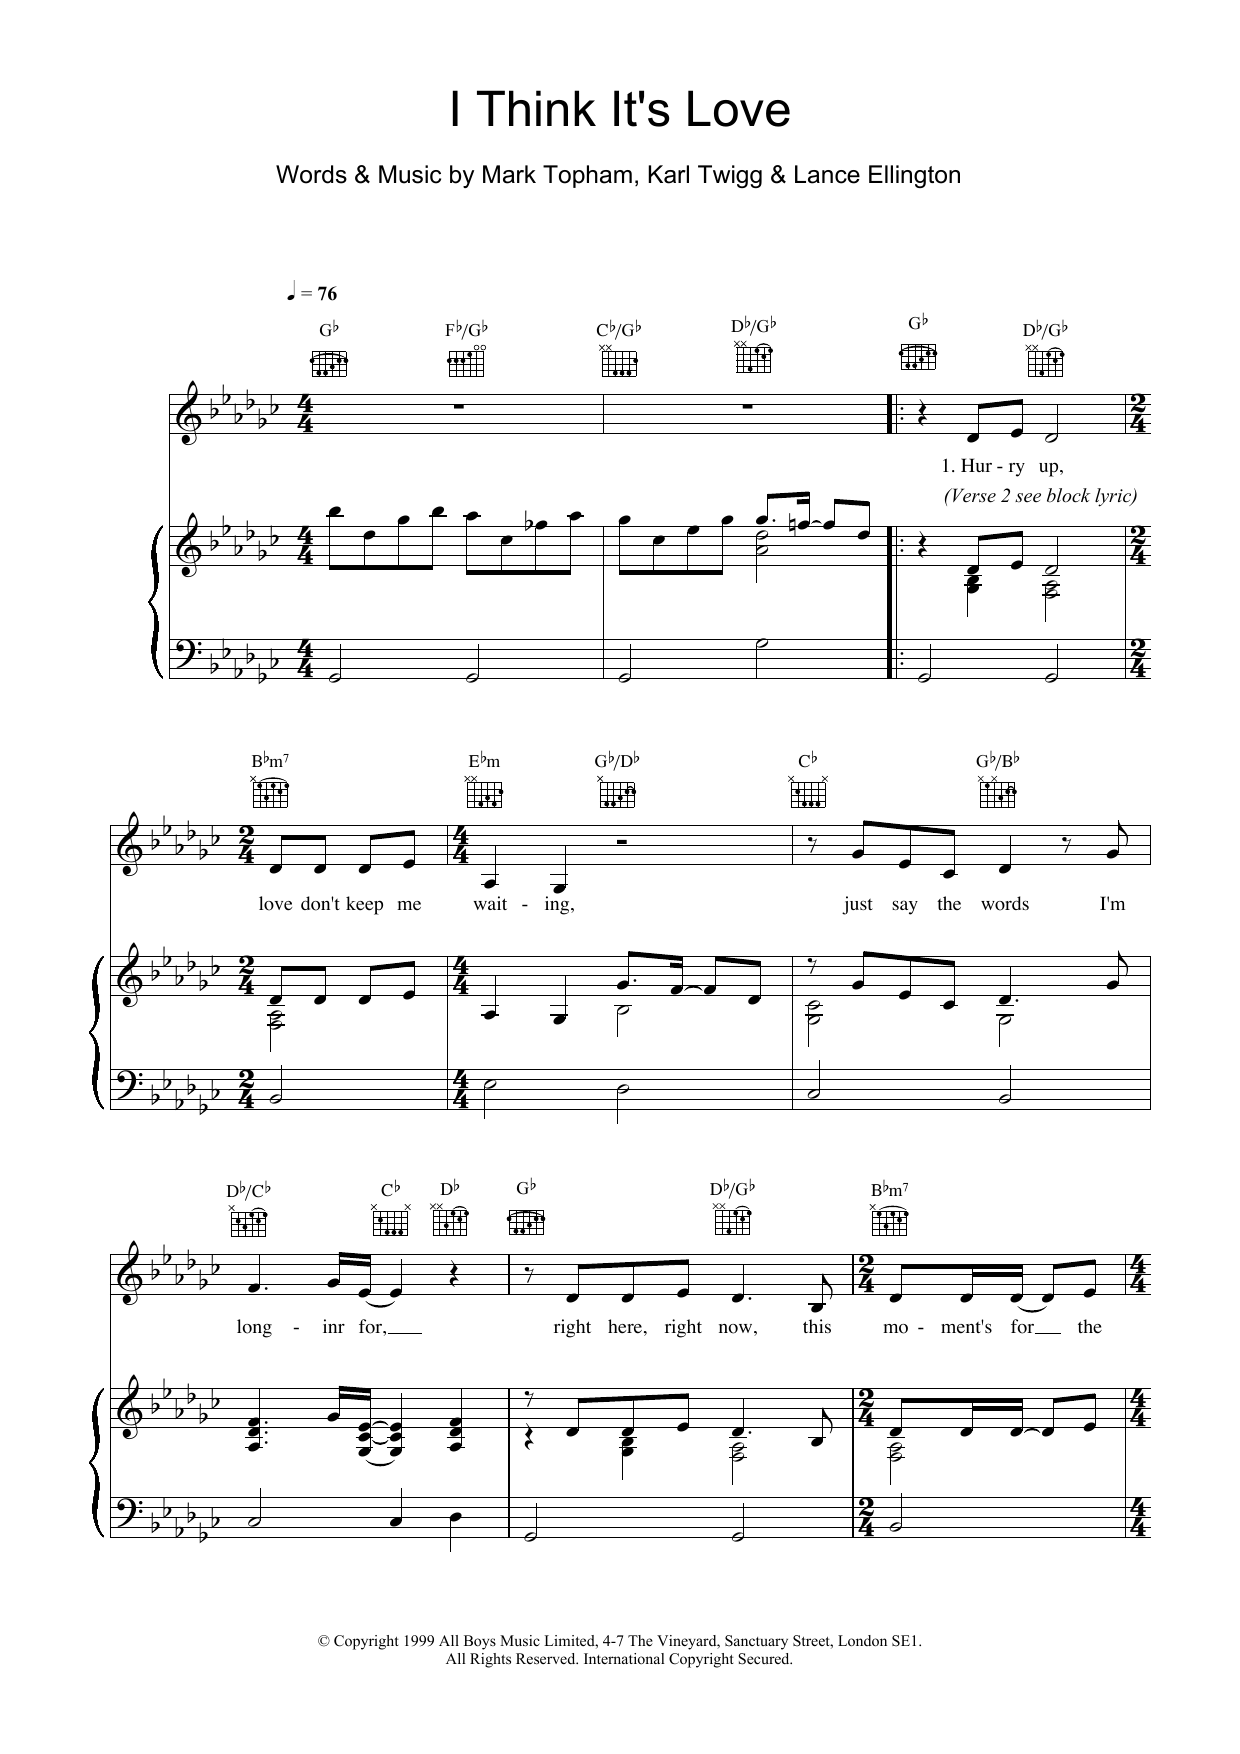 Steps I Think It's Love sheet music notes and chords. Download Printable PDF.